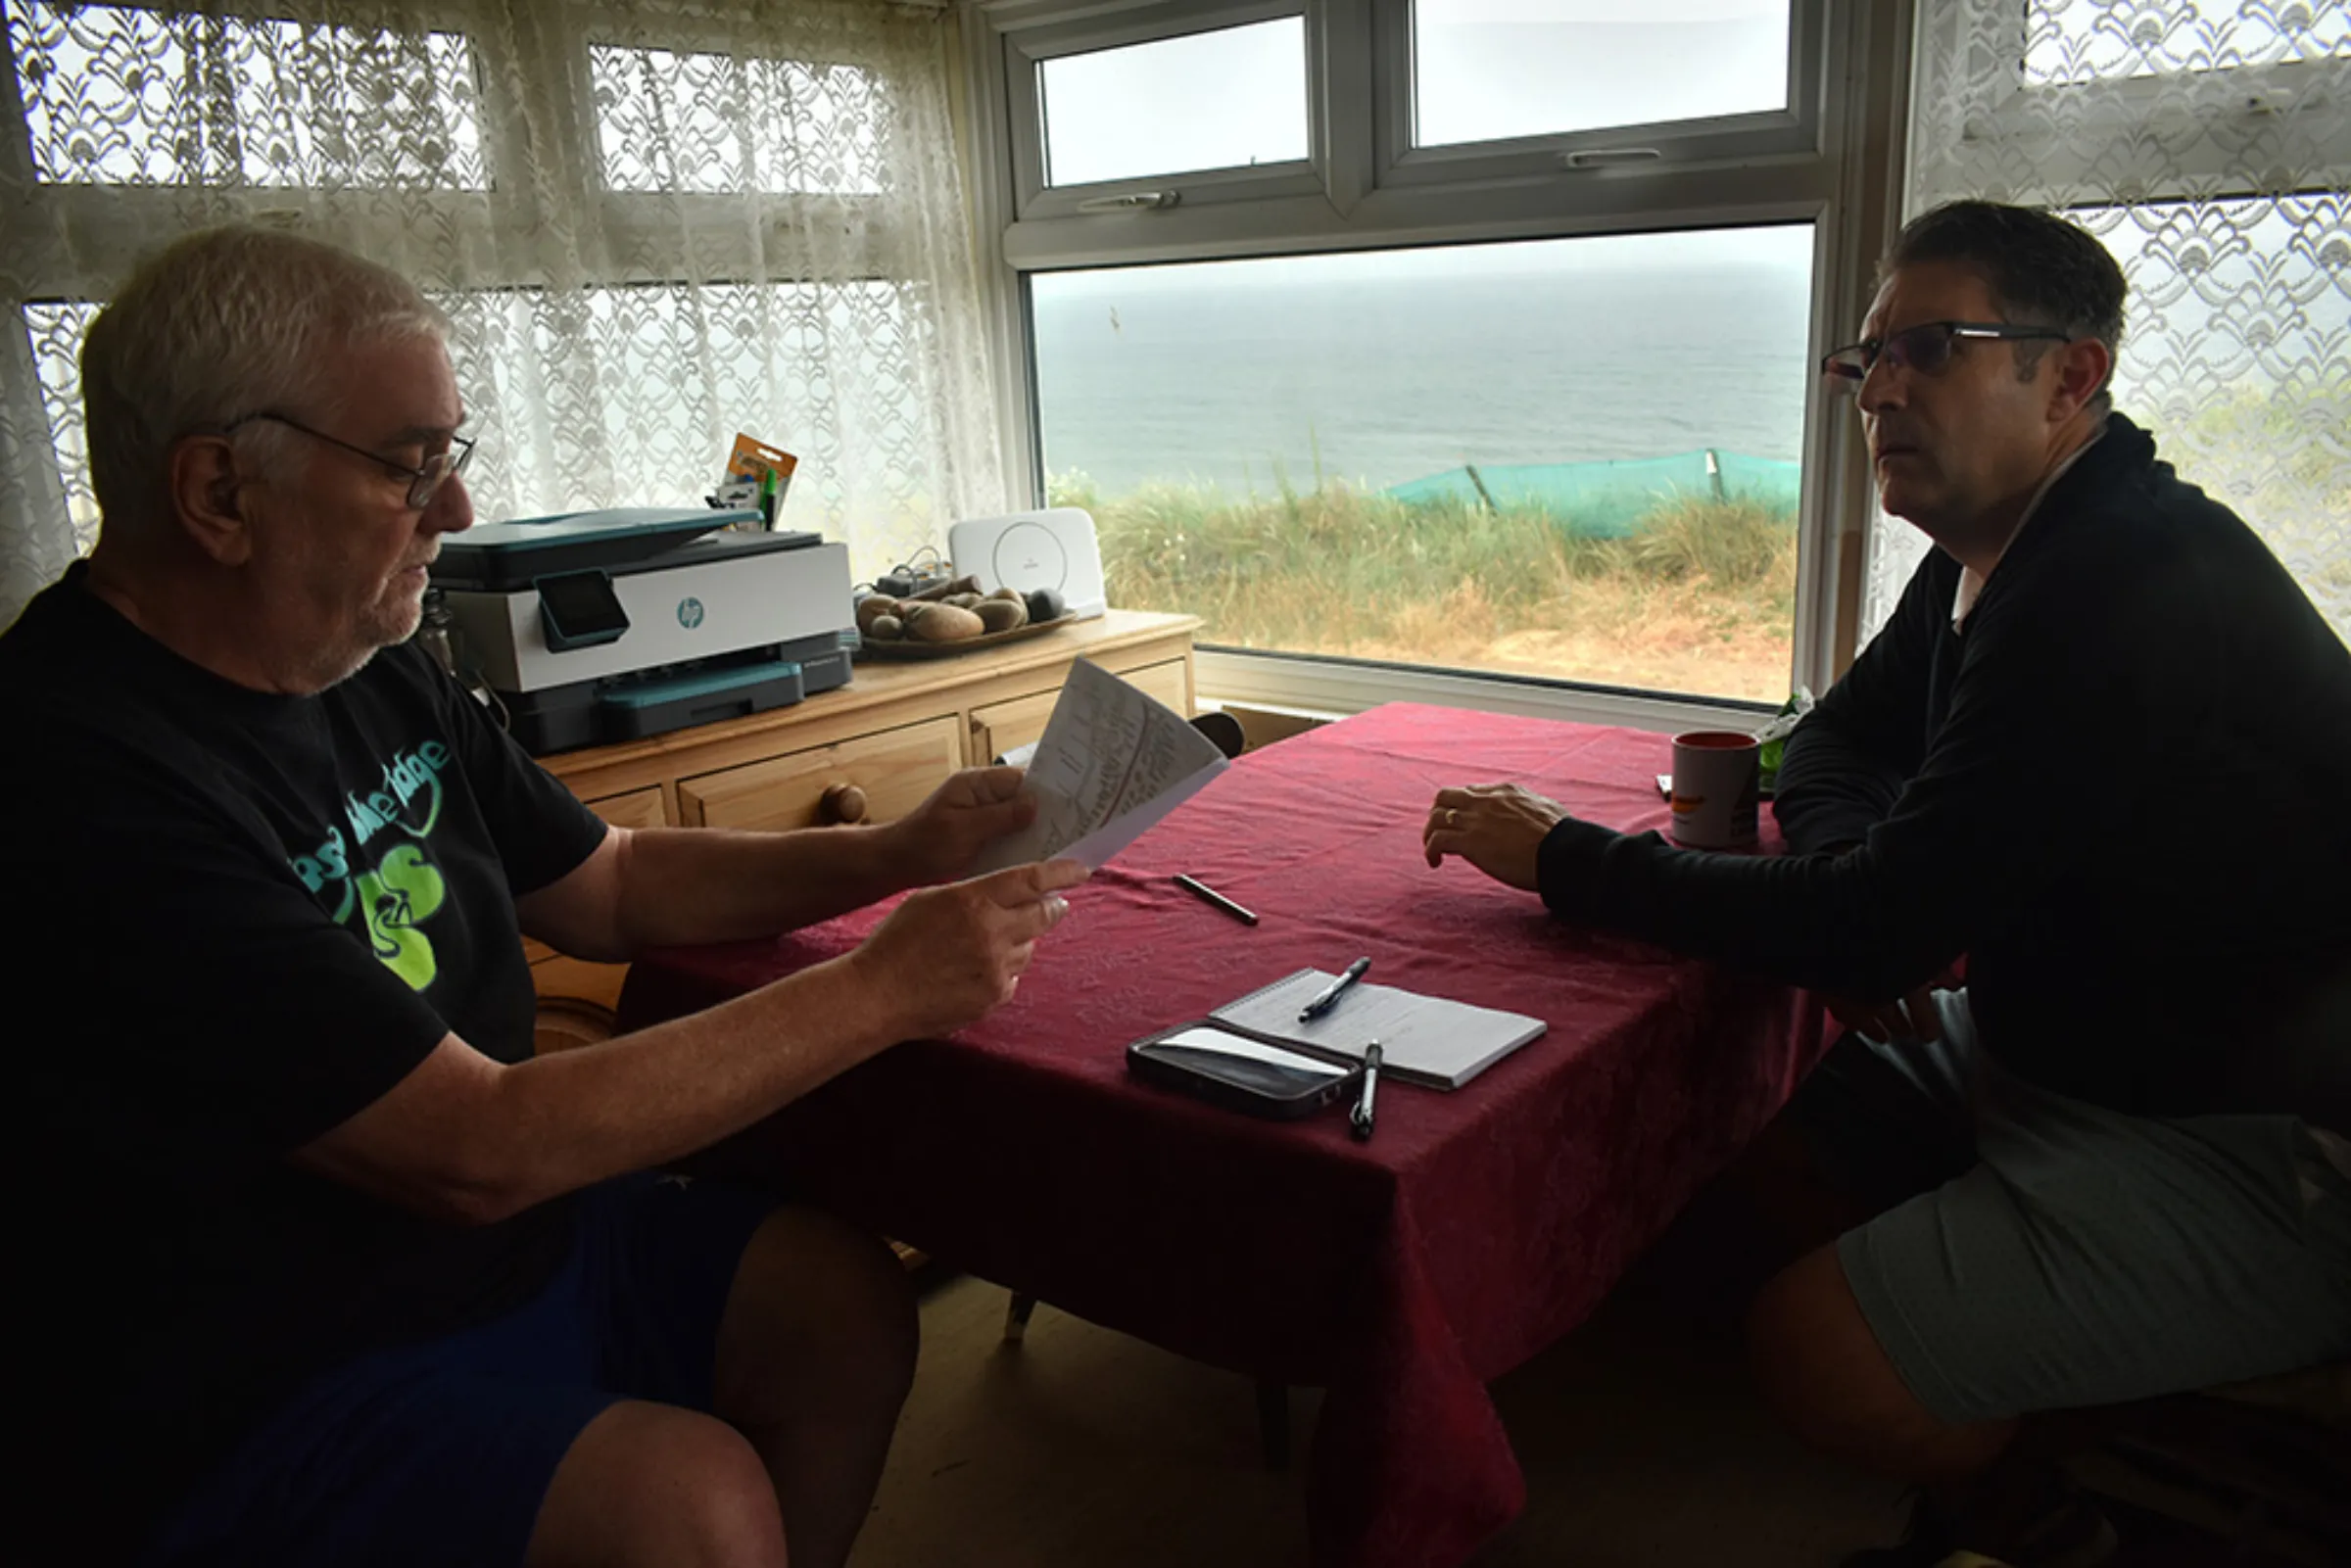 Kevin Jordan, left, and his neighbor Simon Measures discuss an old land registry diagram and the coastal erosion they’ve seen in front of their homes, Hemsby, England, June 20, 2023. Thomson Reuters Foundation/Rachel Parsons